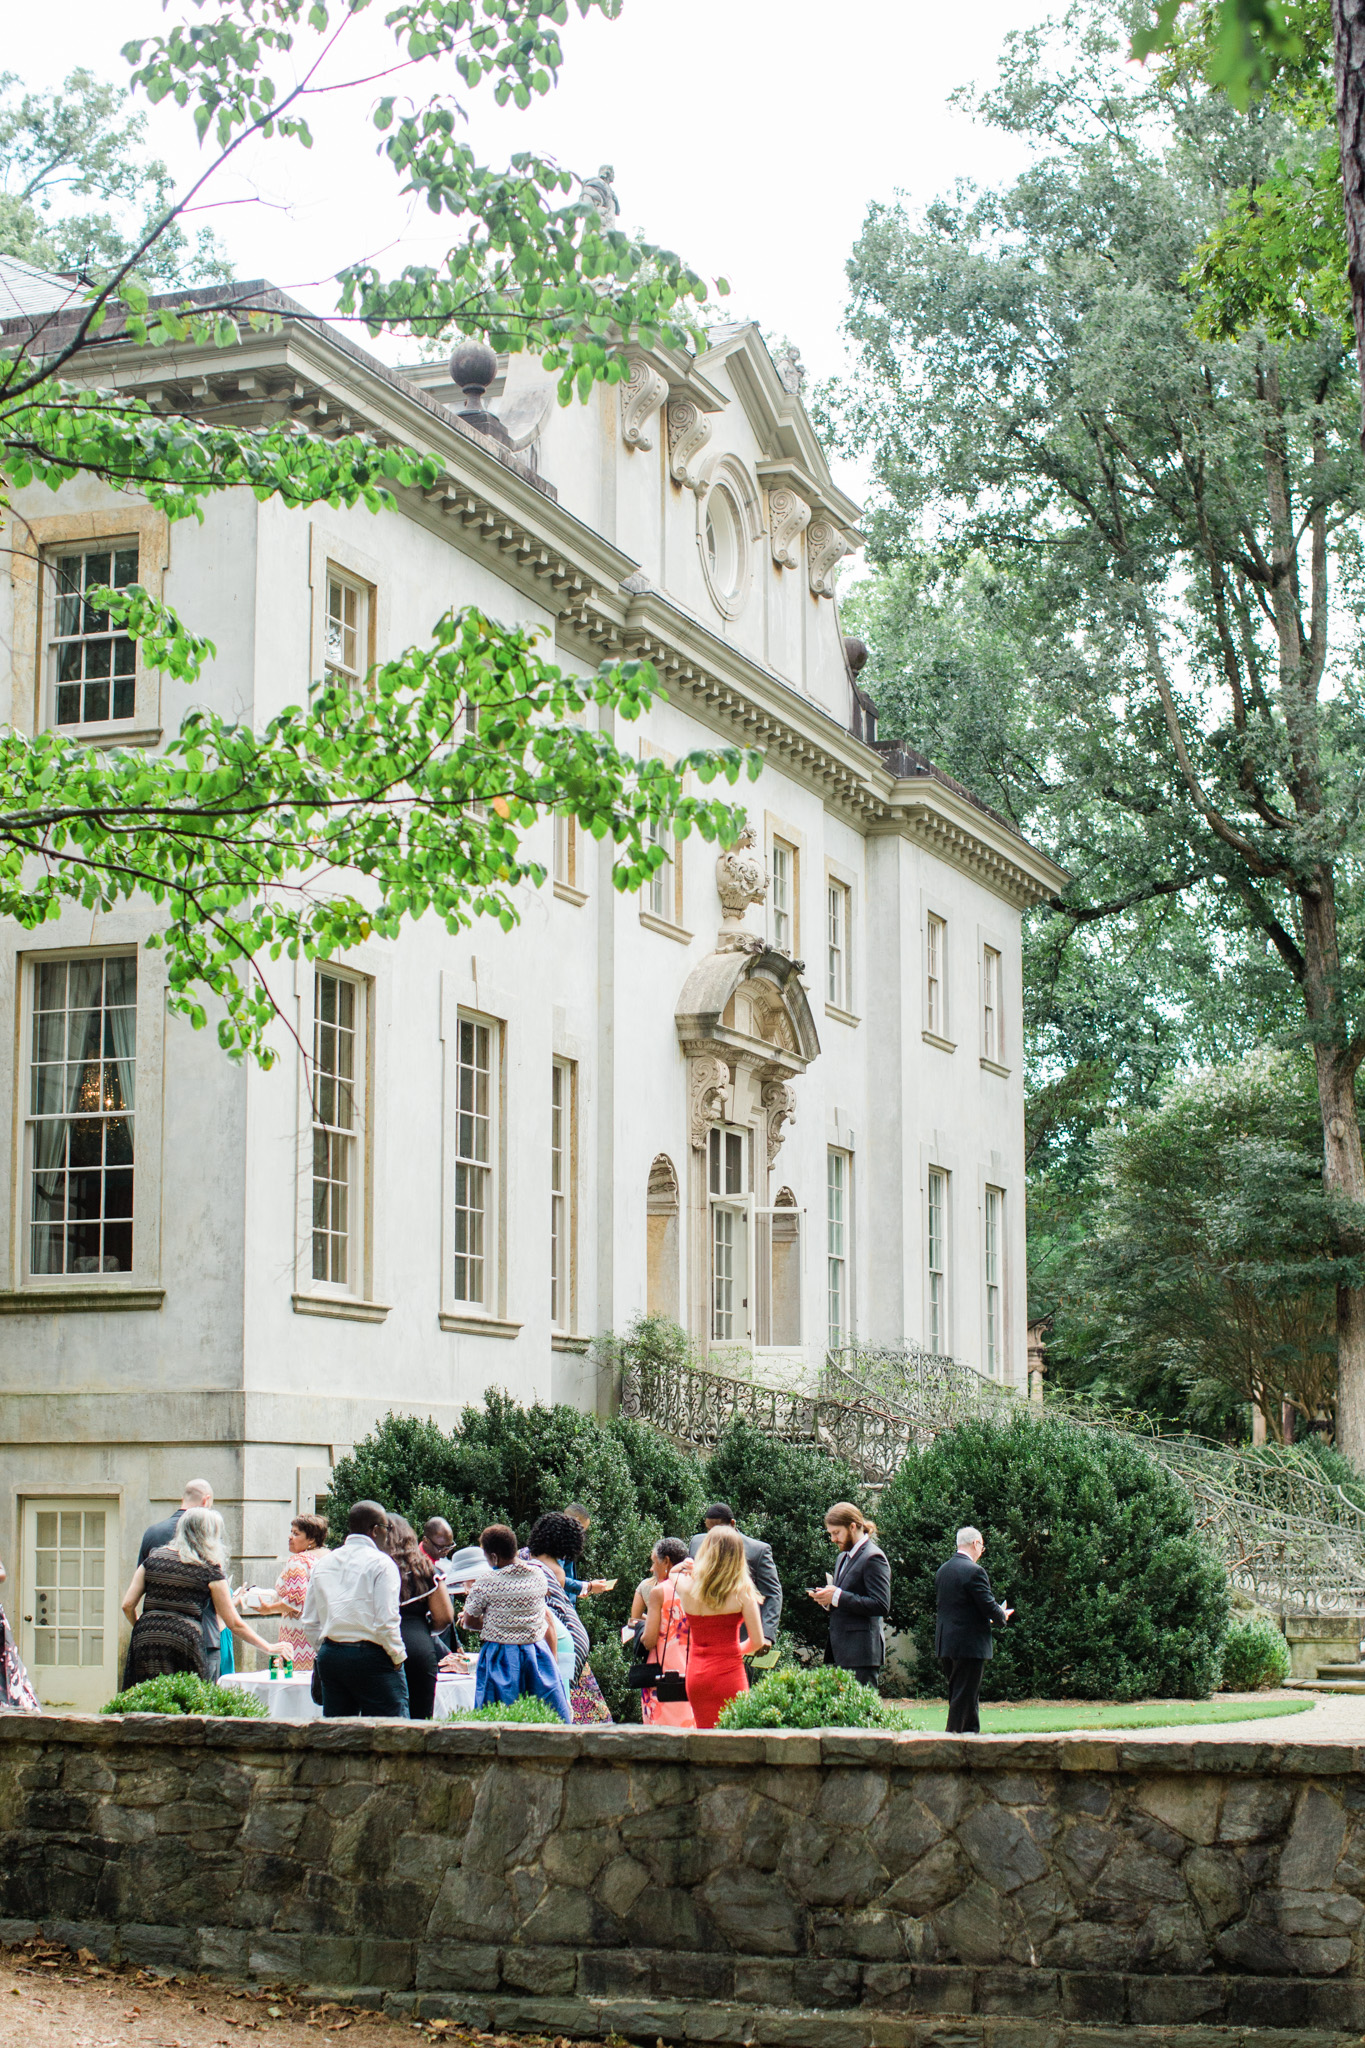 Guests arrive at the Swan House for an outdoor wedding celebration. Event captured by Rebecca Cerasani